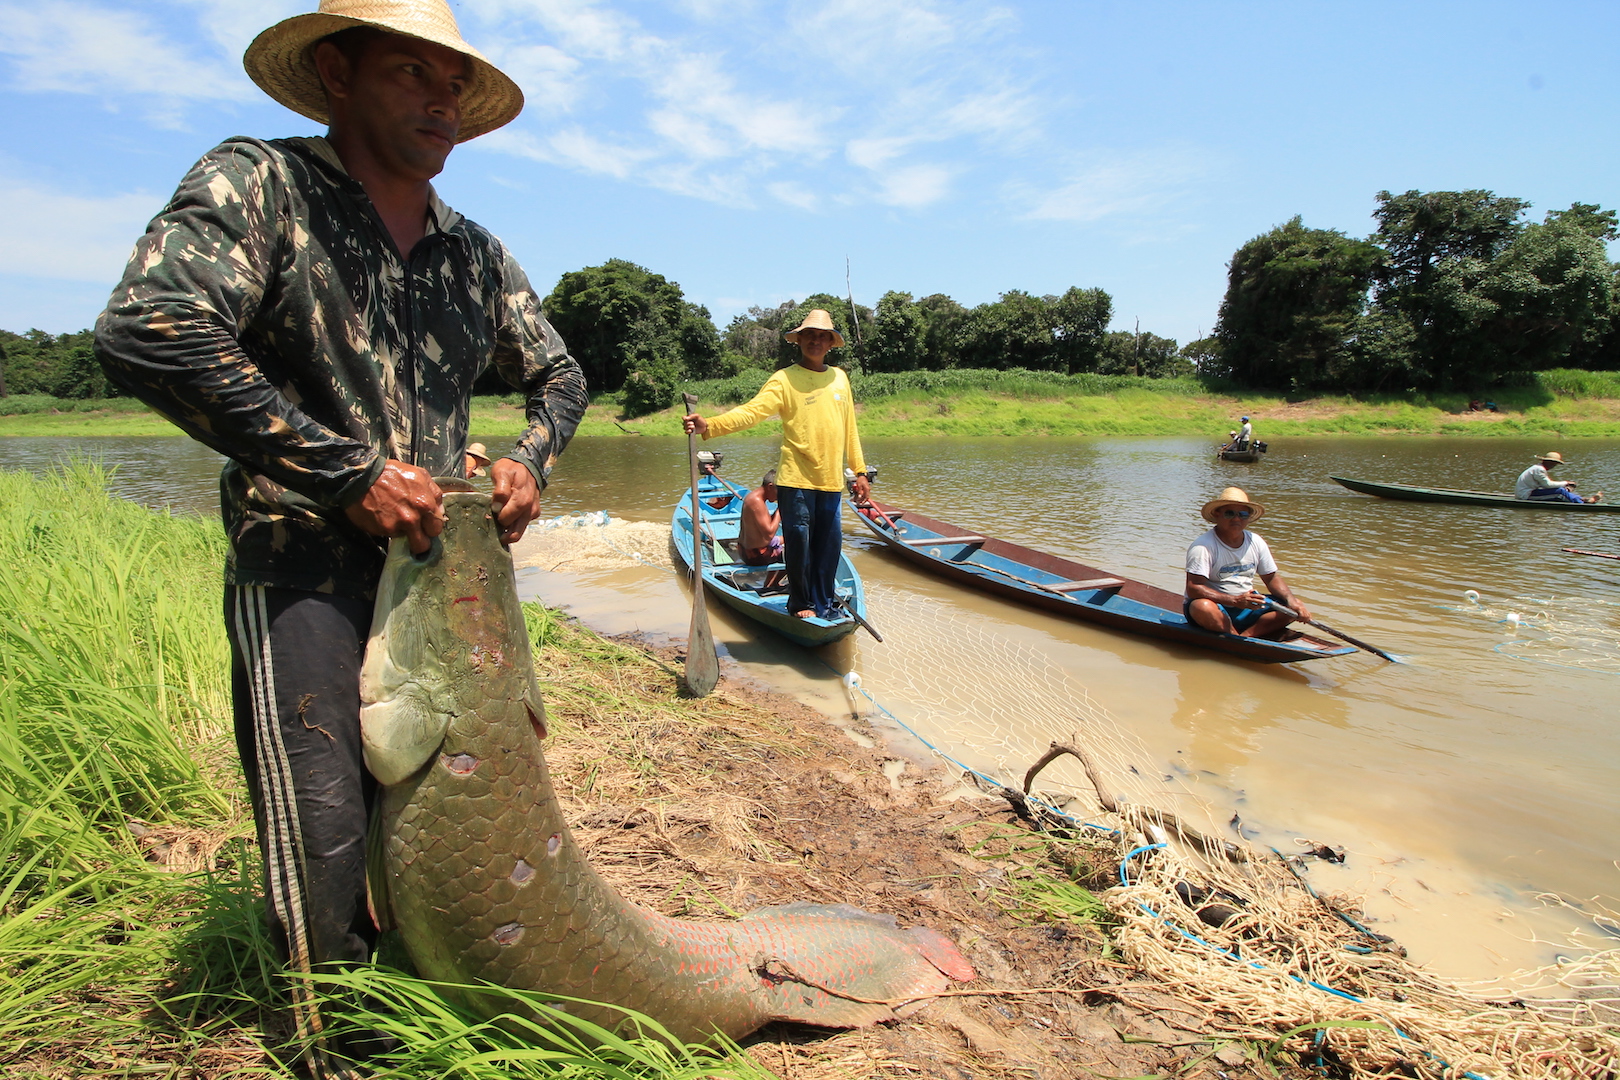 Local communities often don't reap the benefits of tourism in the Amazon